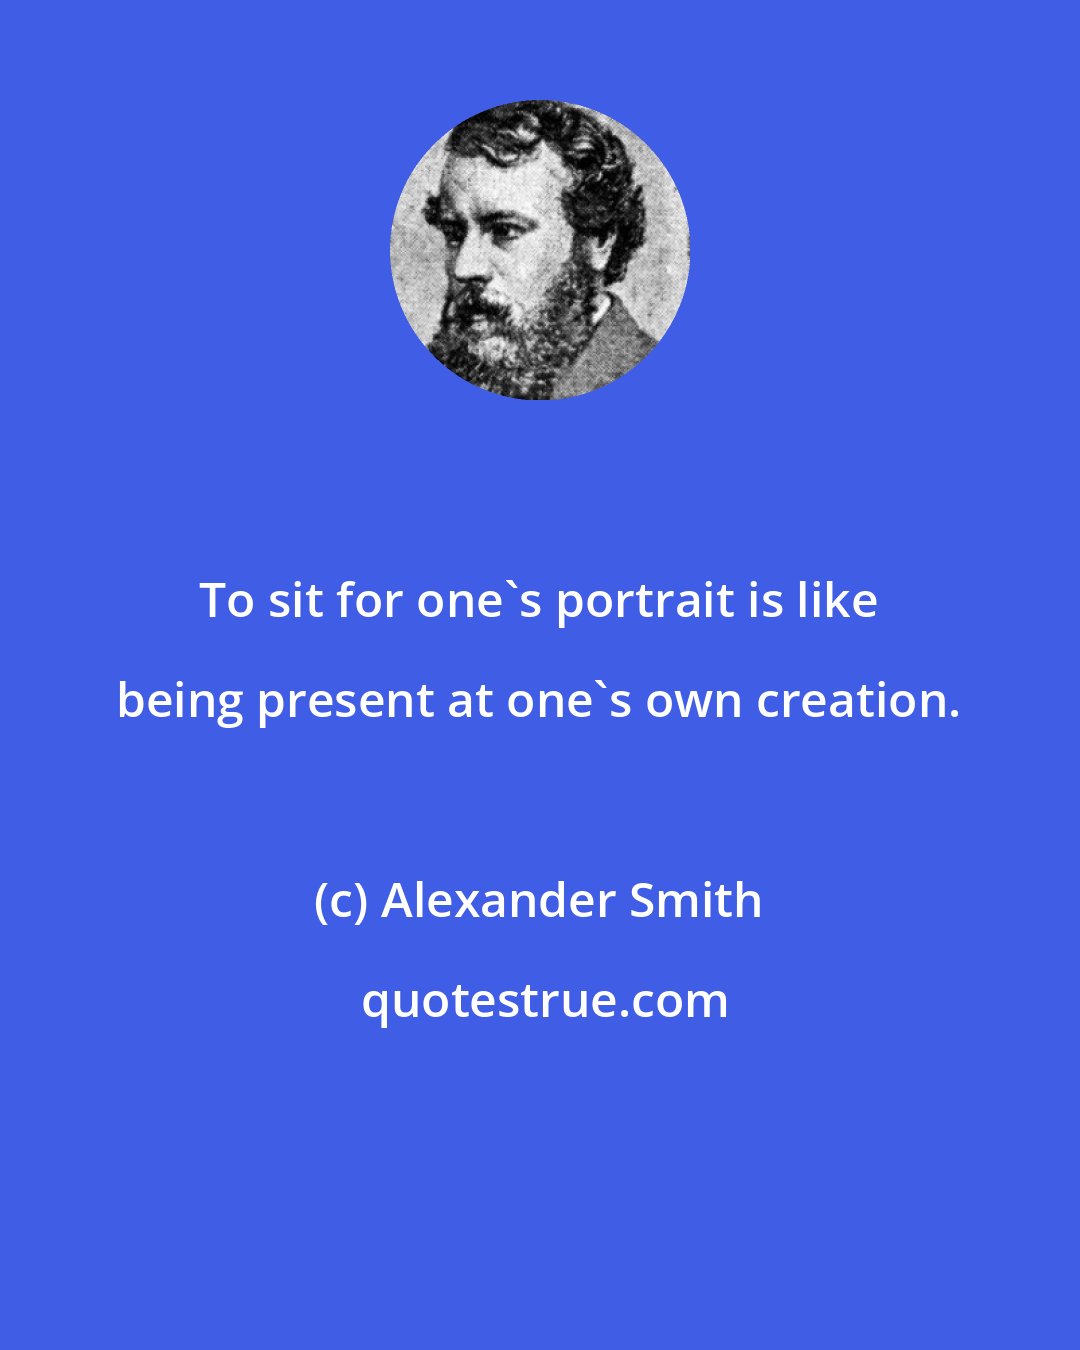 Alexander Smith: To sit for one's portrait is like being present at one's own creation.